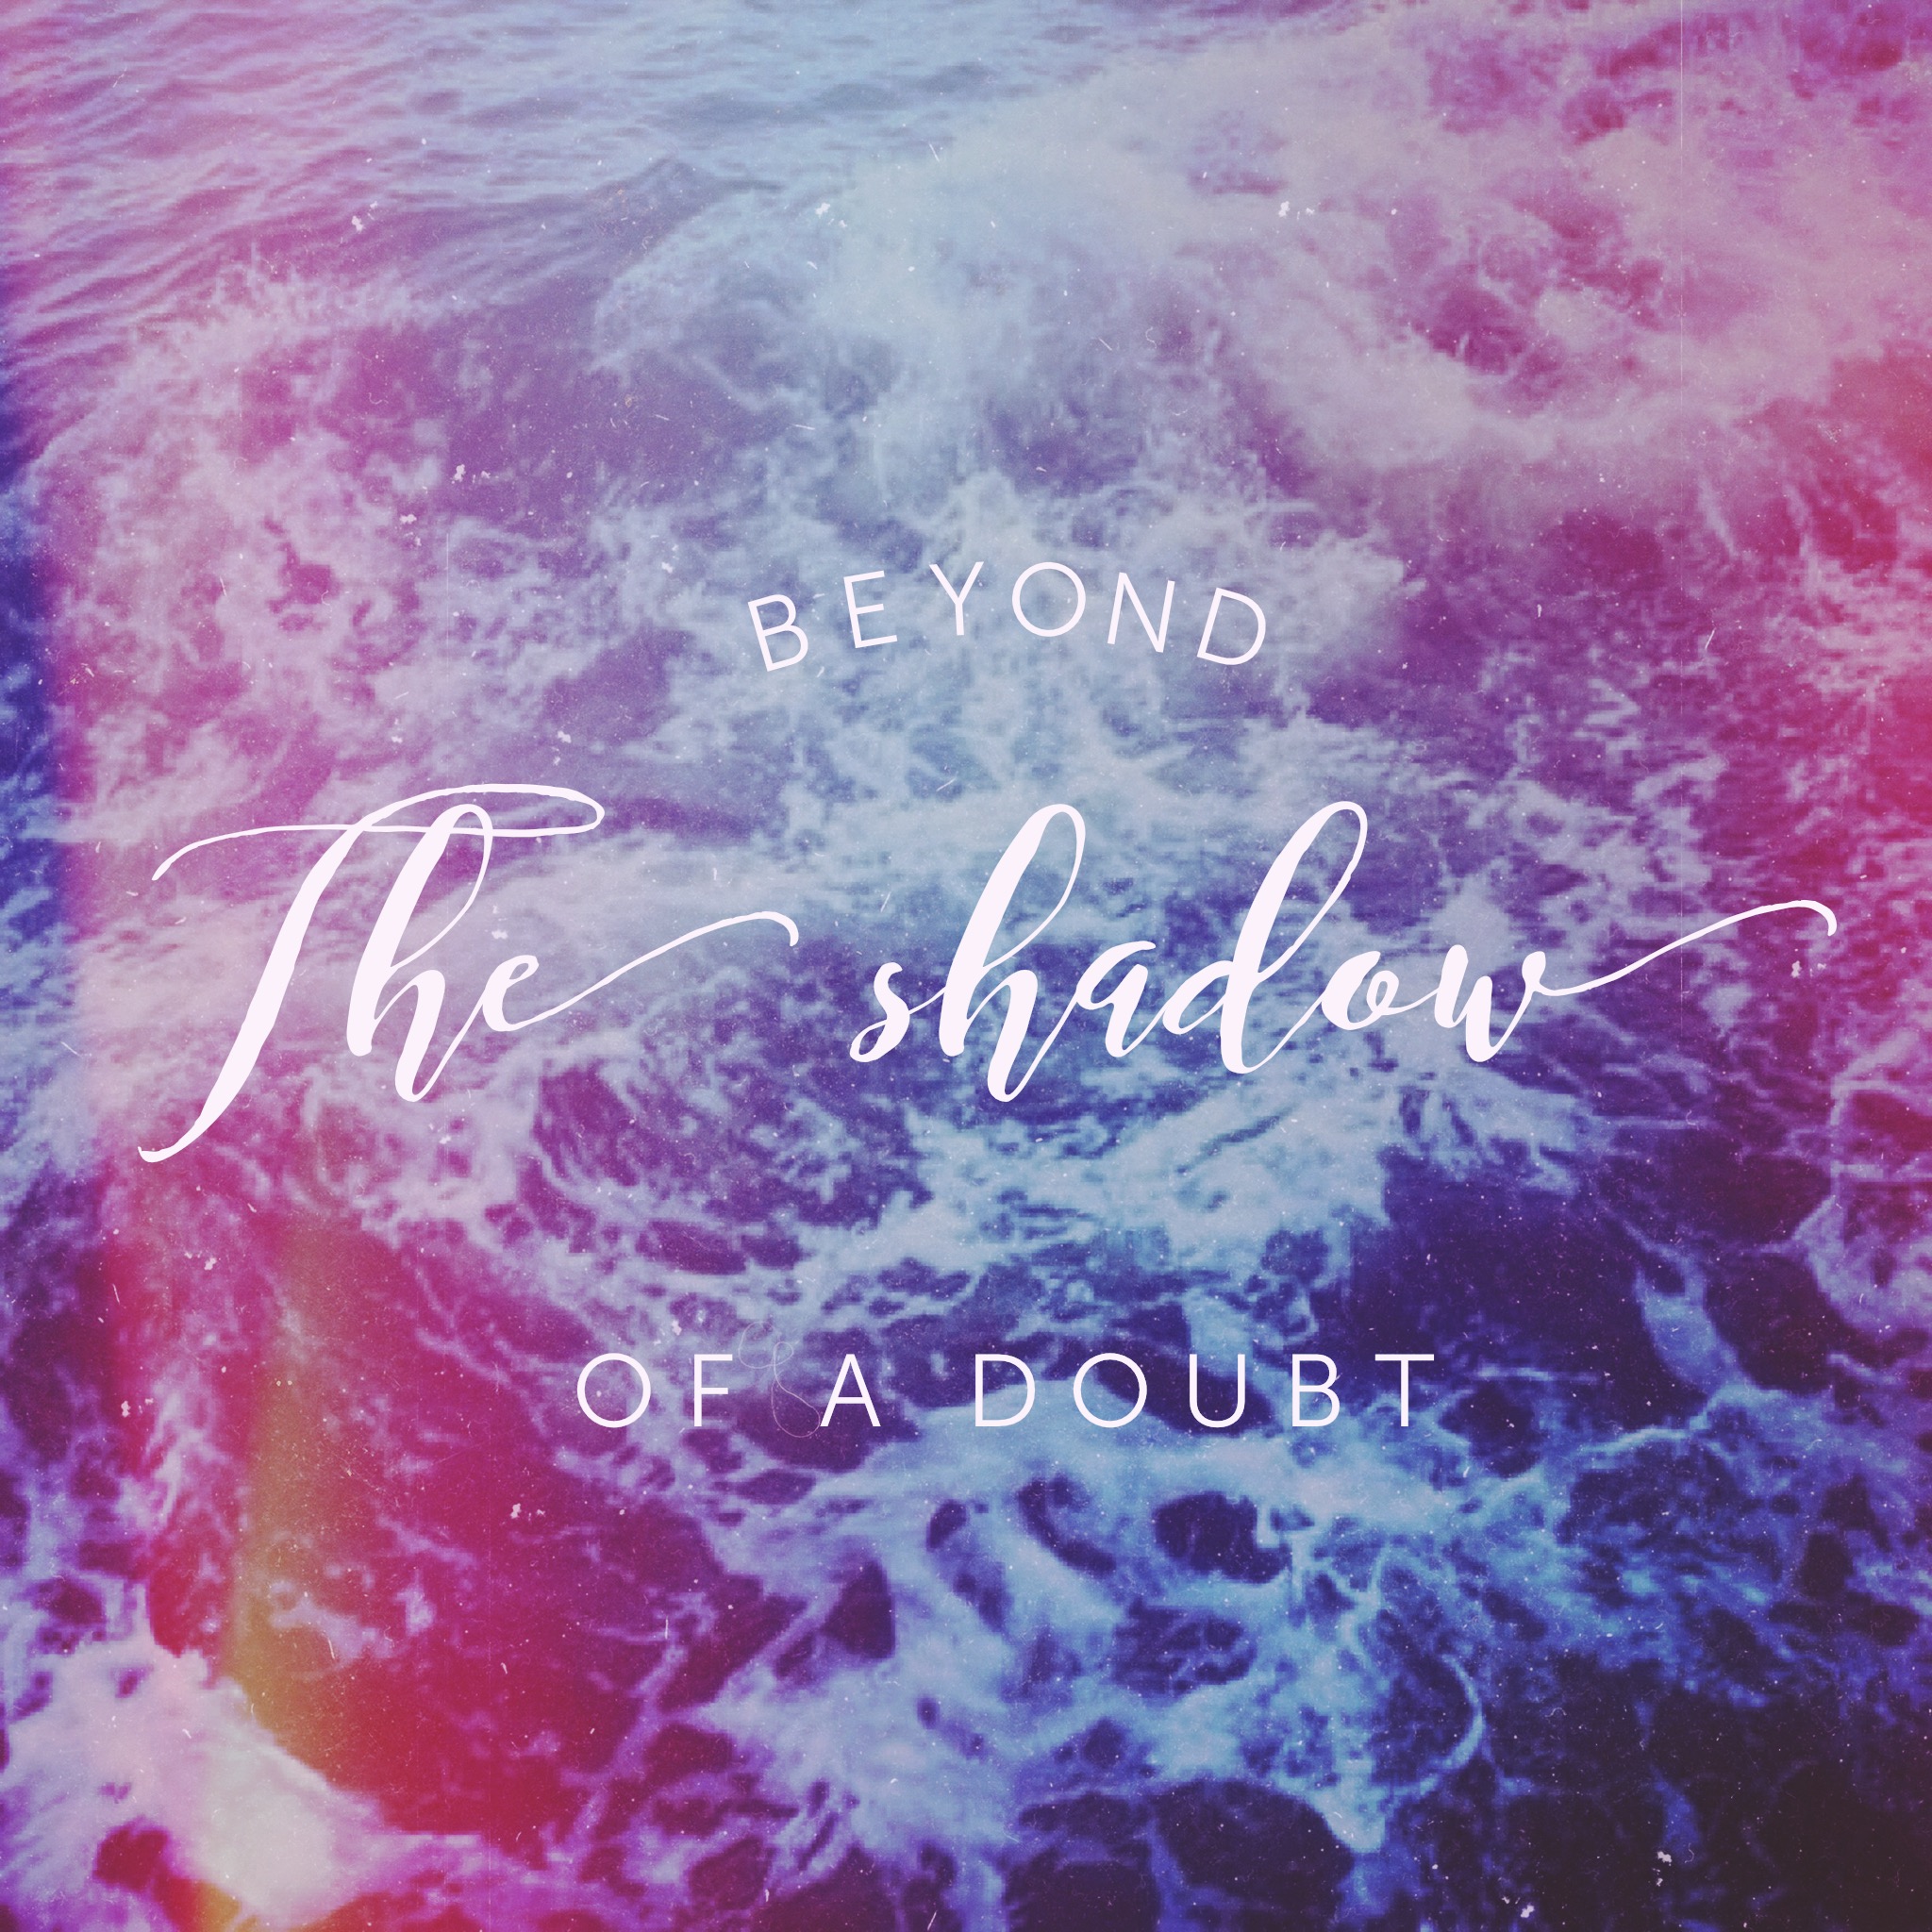 John 20:19-30 | Beyond The Shadow of a Doubt